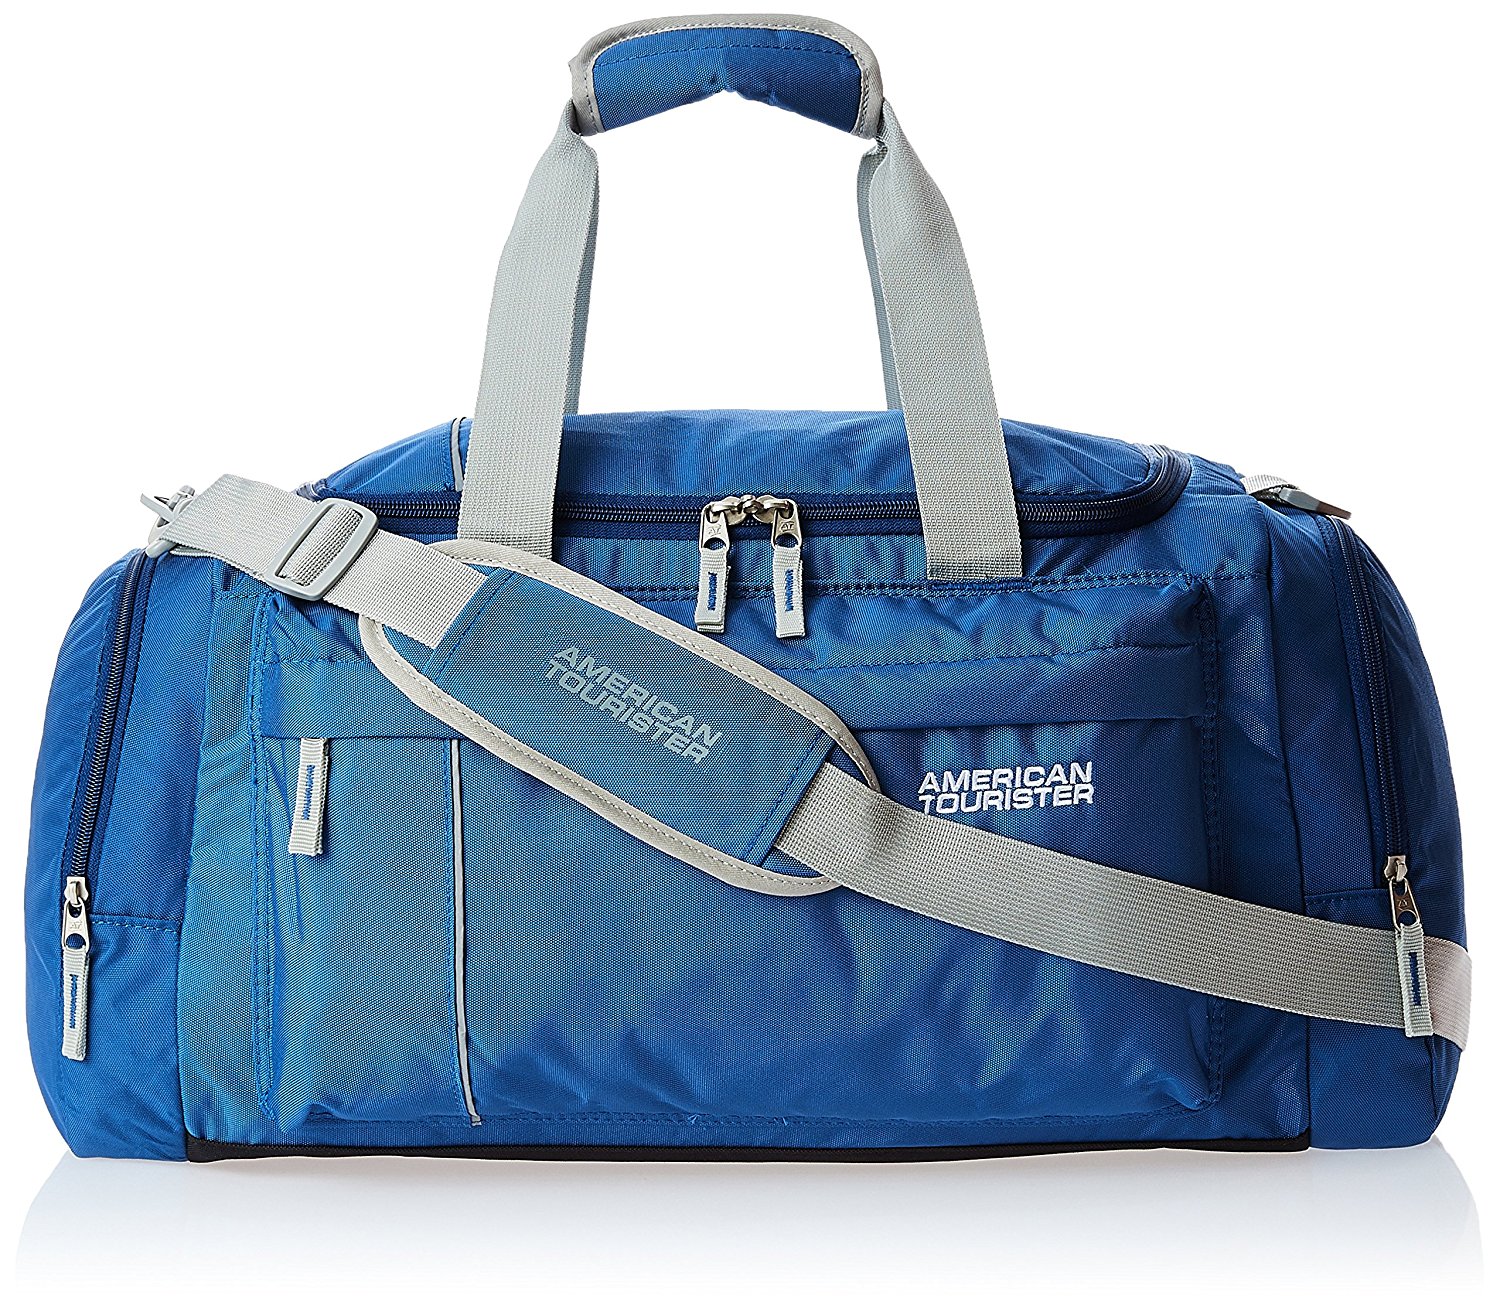 American Tourister Nylon 55 cms Blue Travel Duffle (40X (0) 01 008) Price in India